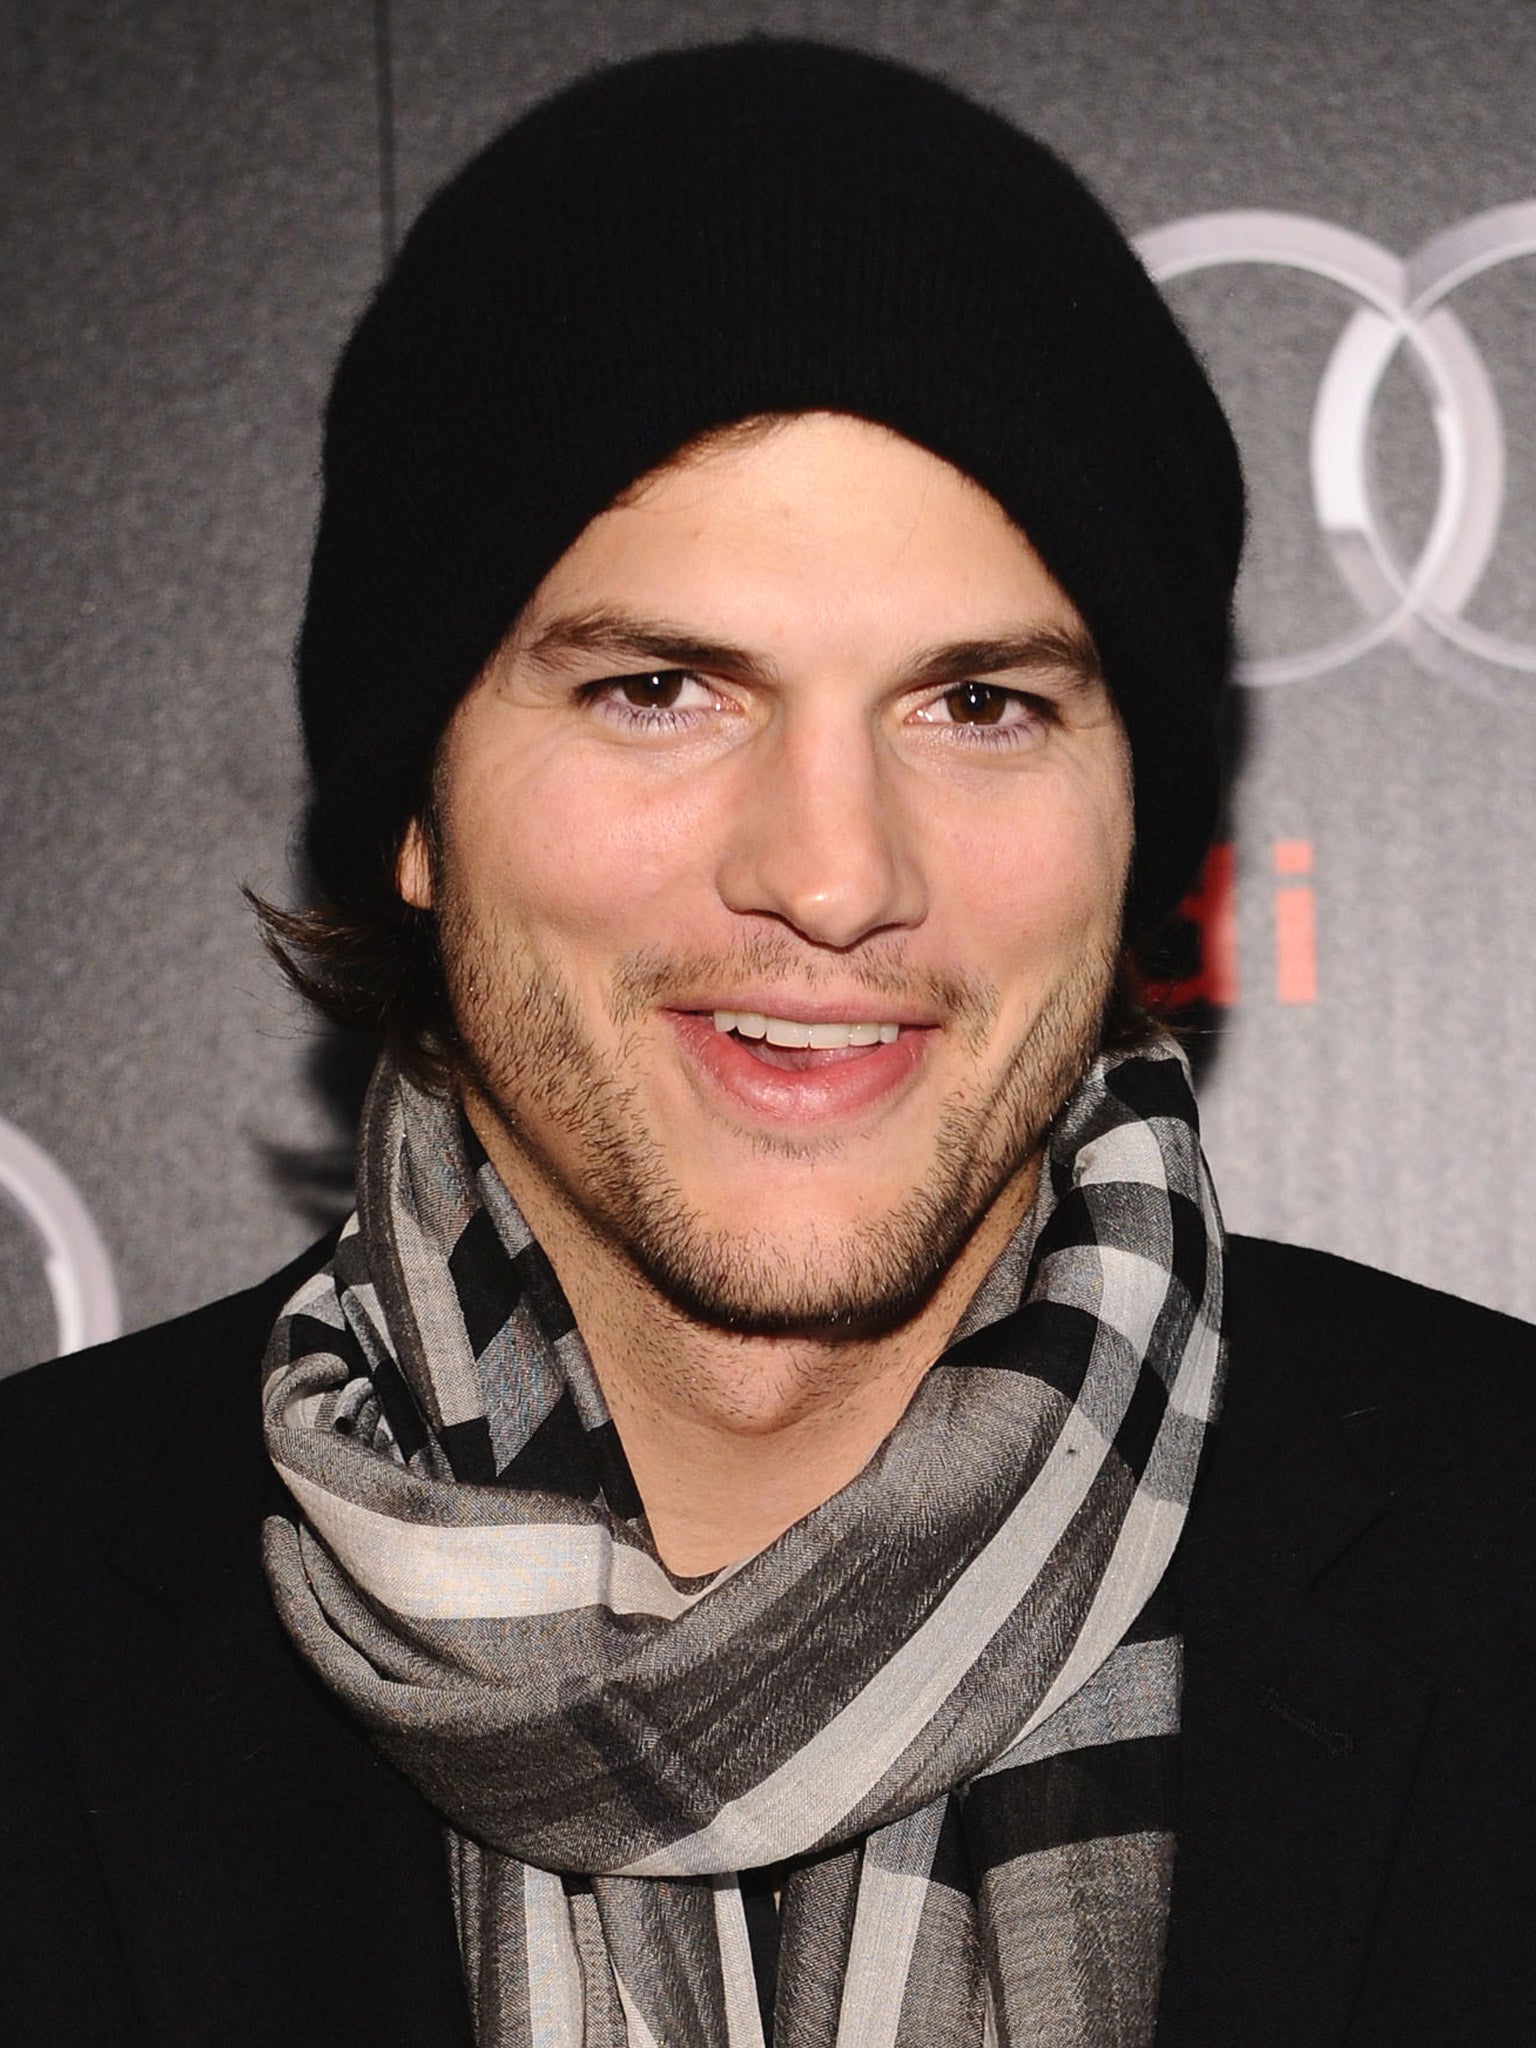 Ashton Kutcher, star of MTV's 'Punk'd', is one of a growing band of celebrity 'swatting' victims